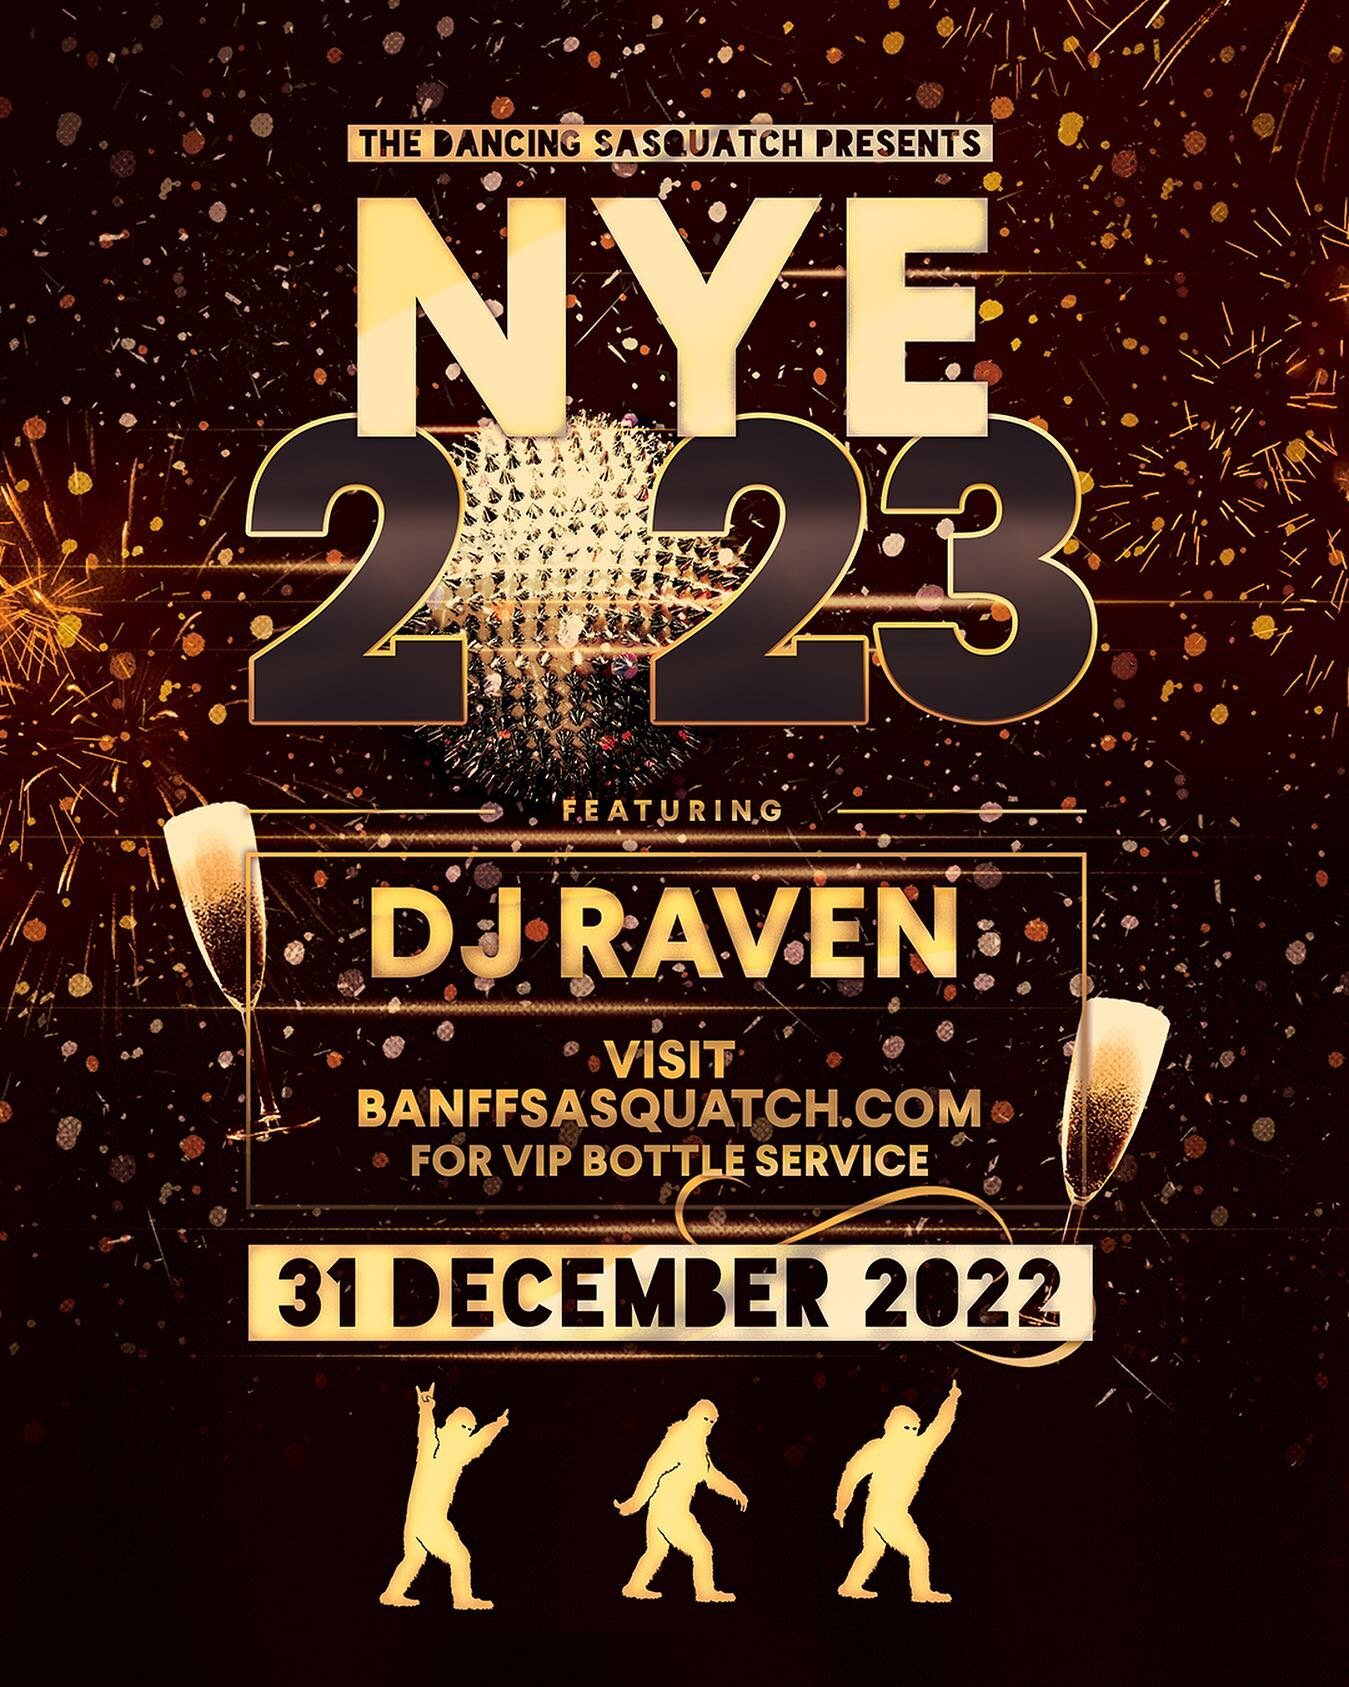 NYE tickets are now available- don&rsquo;t miss the biggest party of the year! DJ @ravenmangune in the house&hellip; and a rumoured appearance from the &lsquo;Squatch himself! Party like an animal! Get your tickets at the link in bio